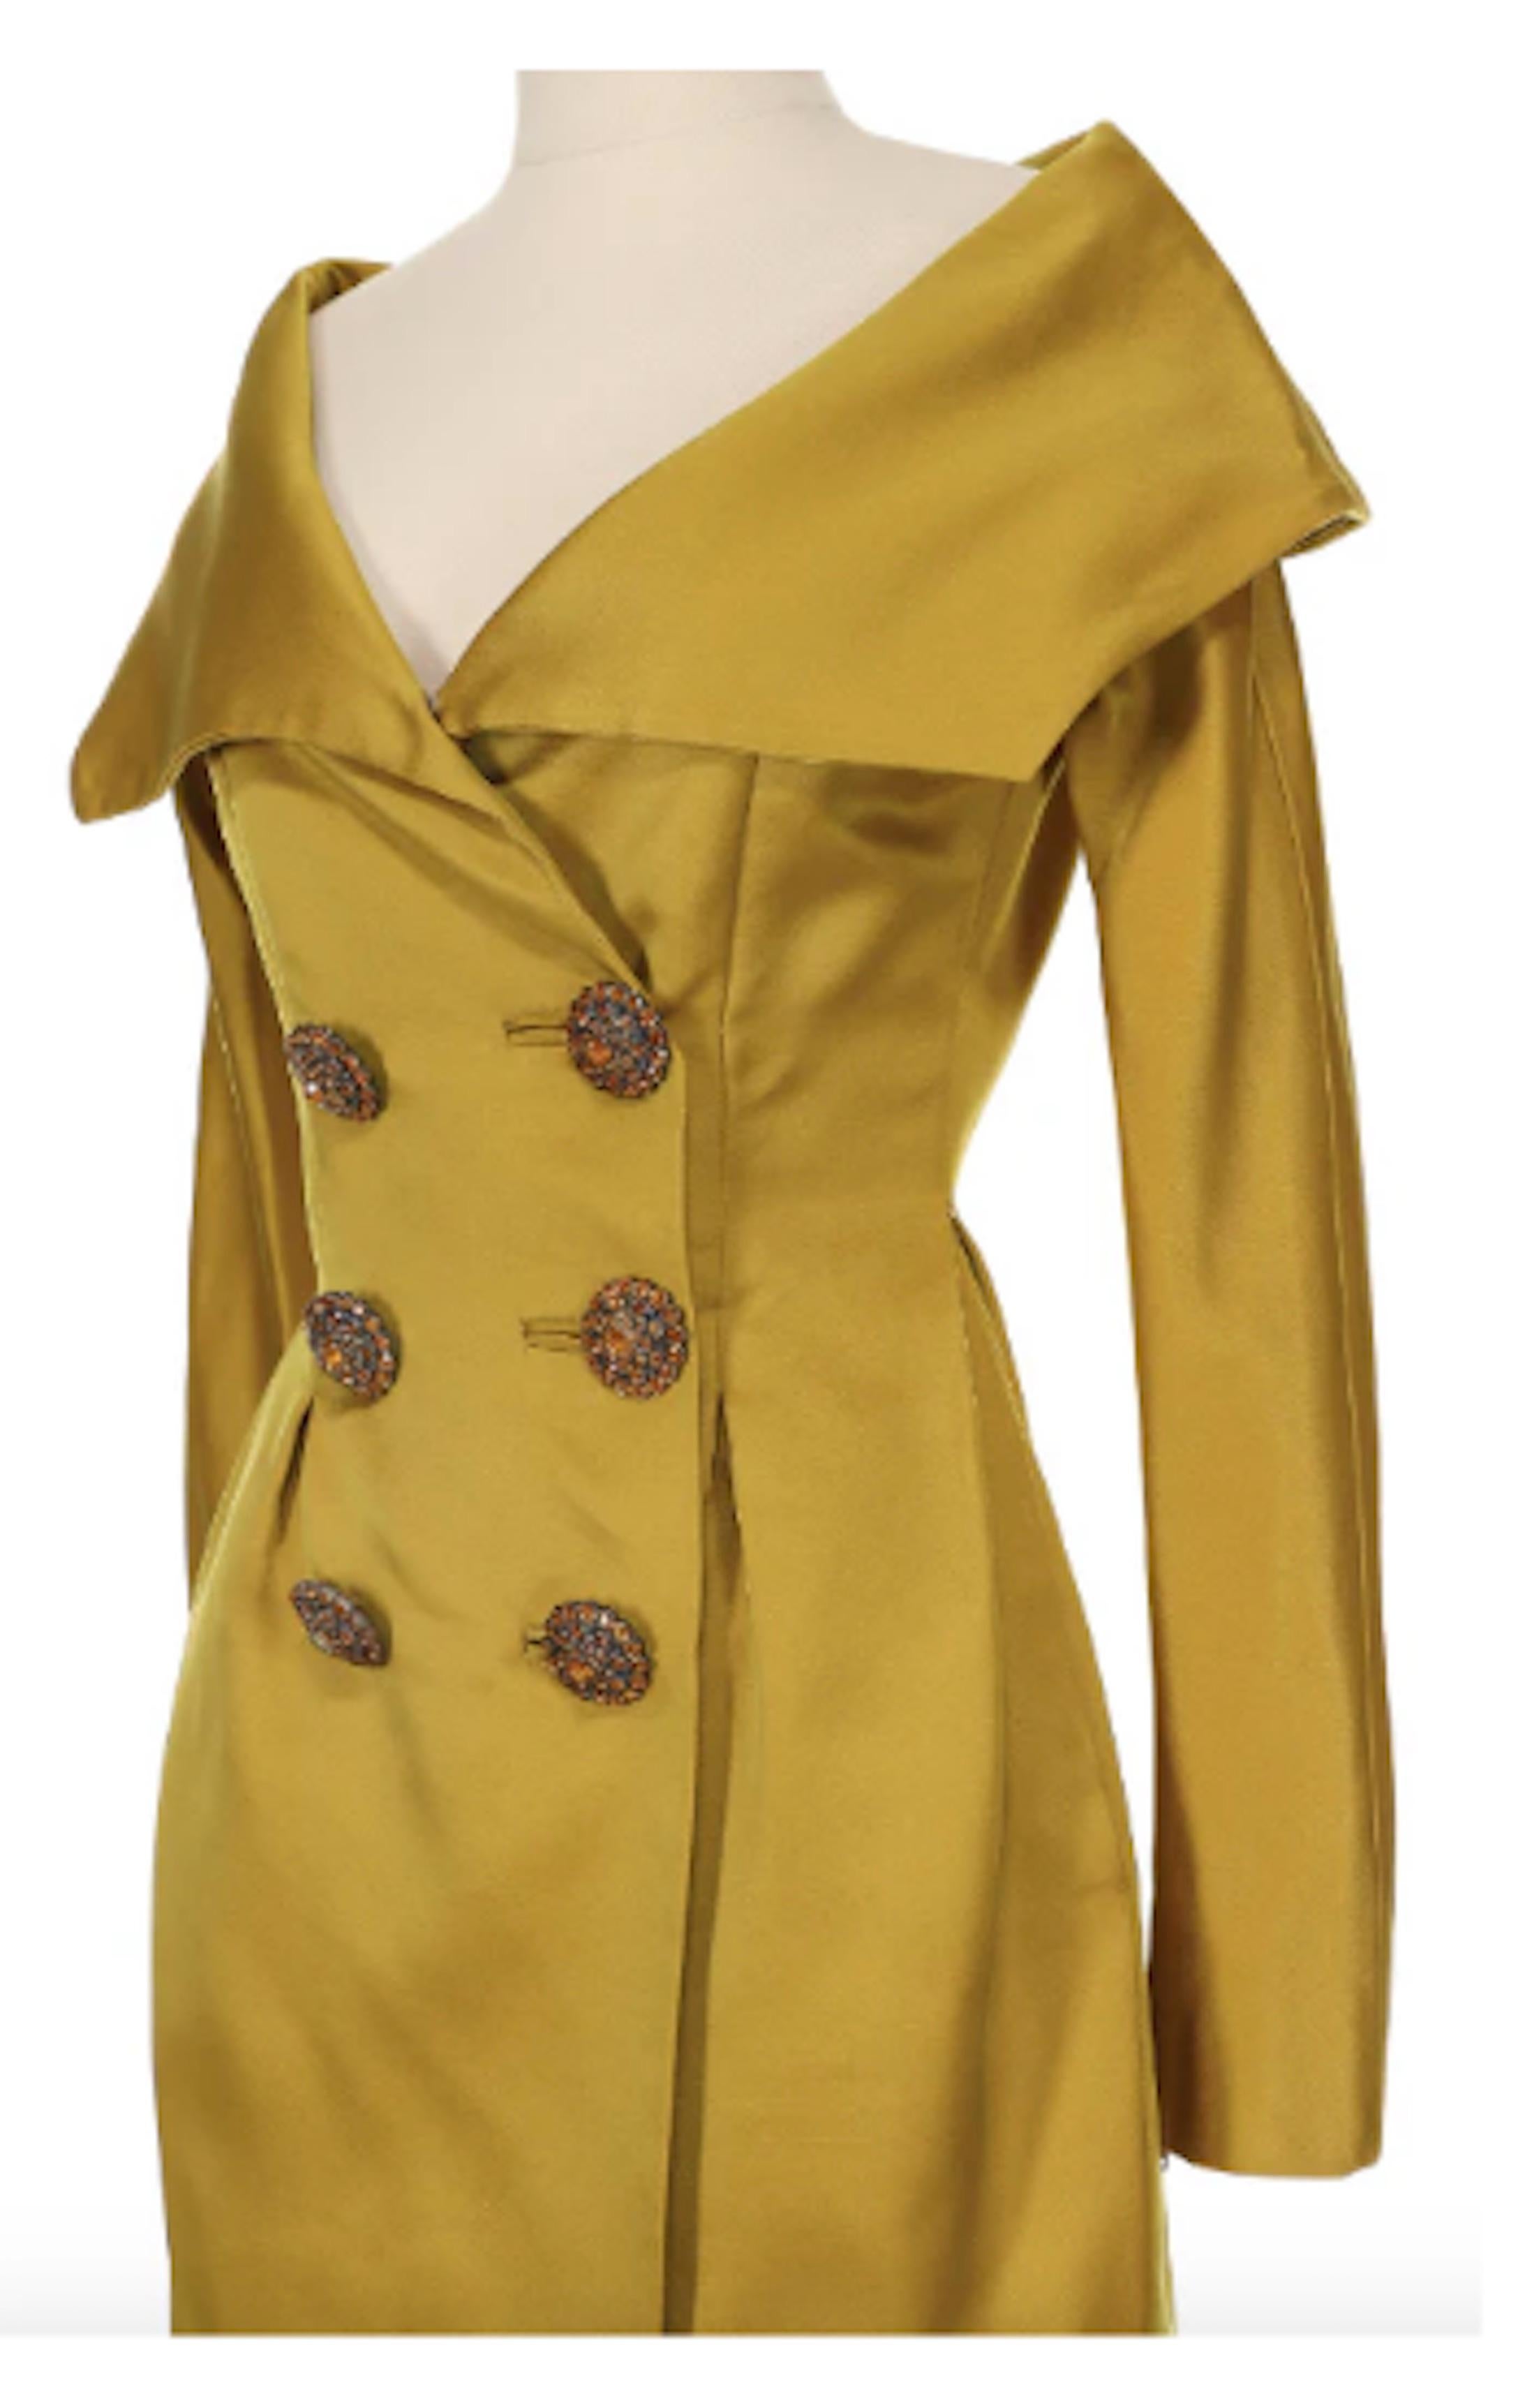 Christian Lacroix Couture Yellow Off The Shoulder Dress In Excellent Condition For Sale In New York, NY